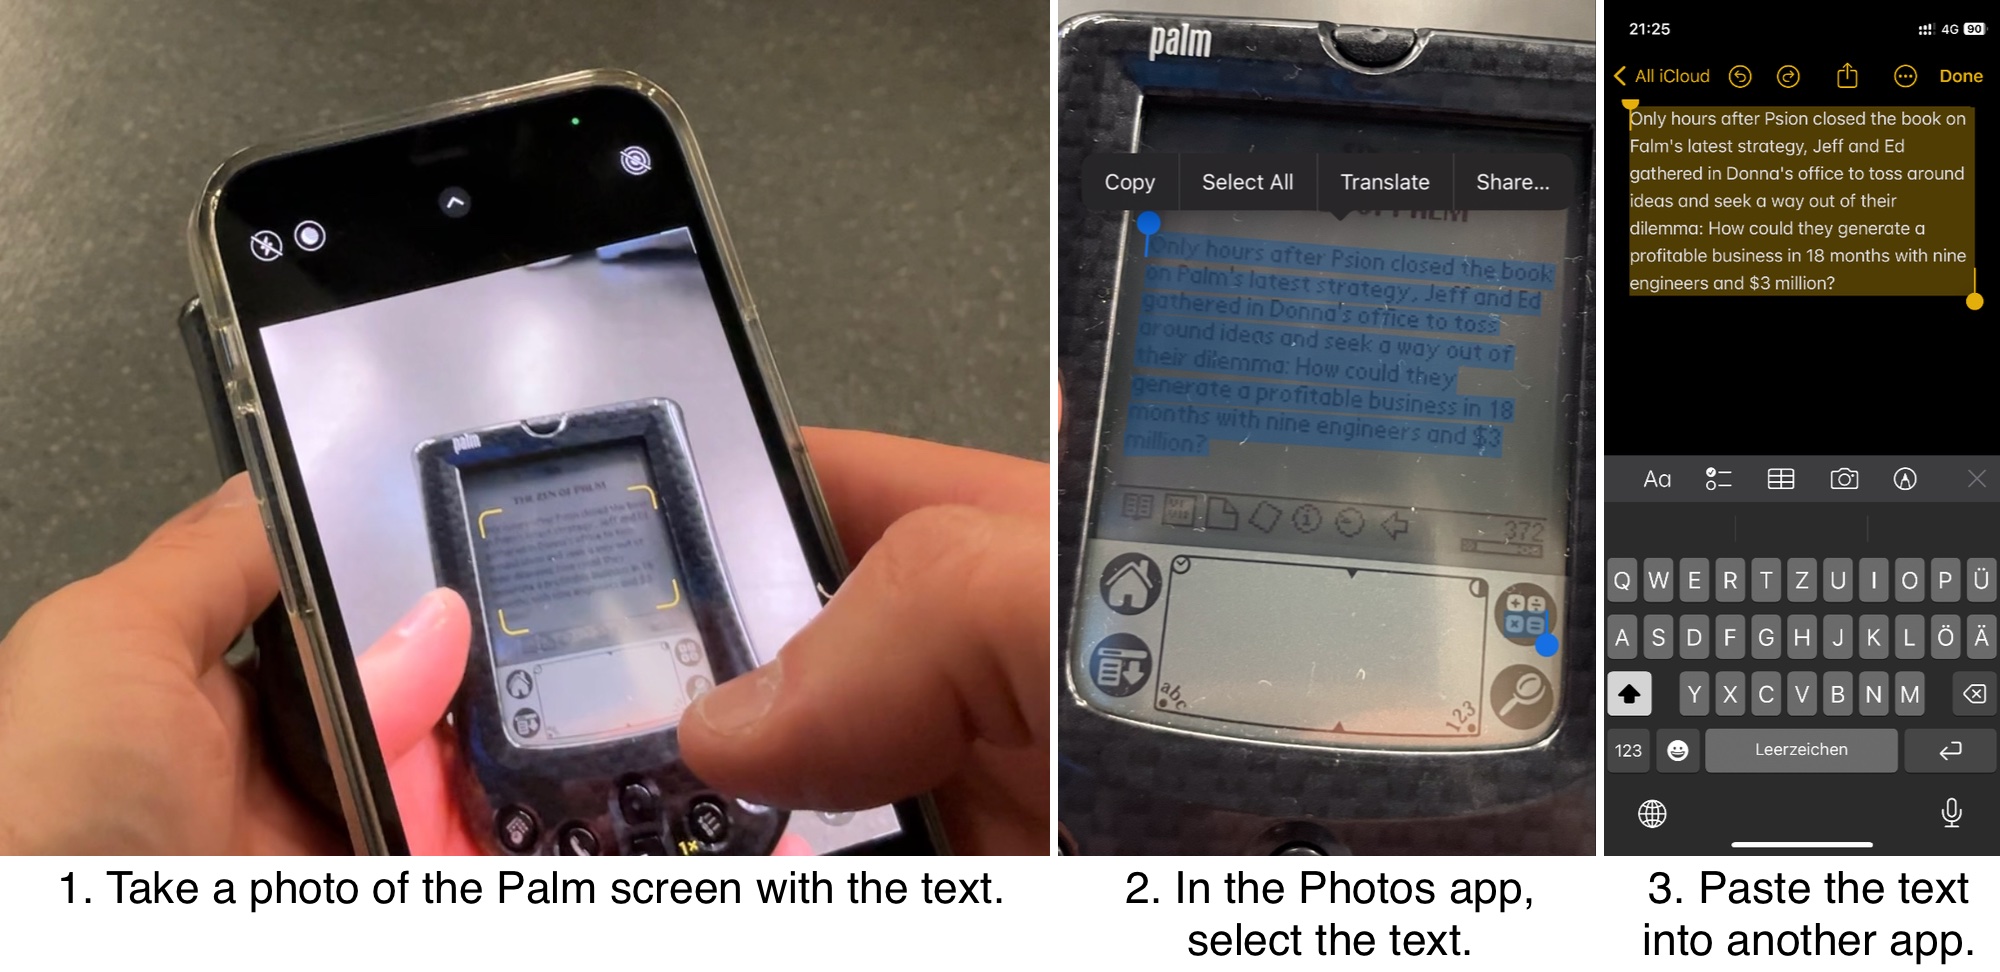 Convert the text on the Palm's screen by taking a photo.